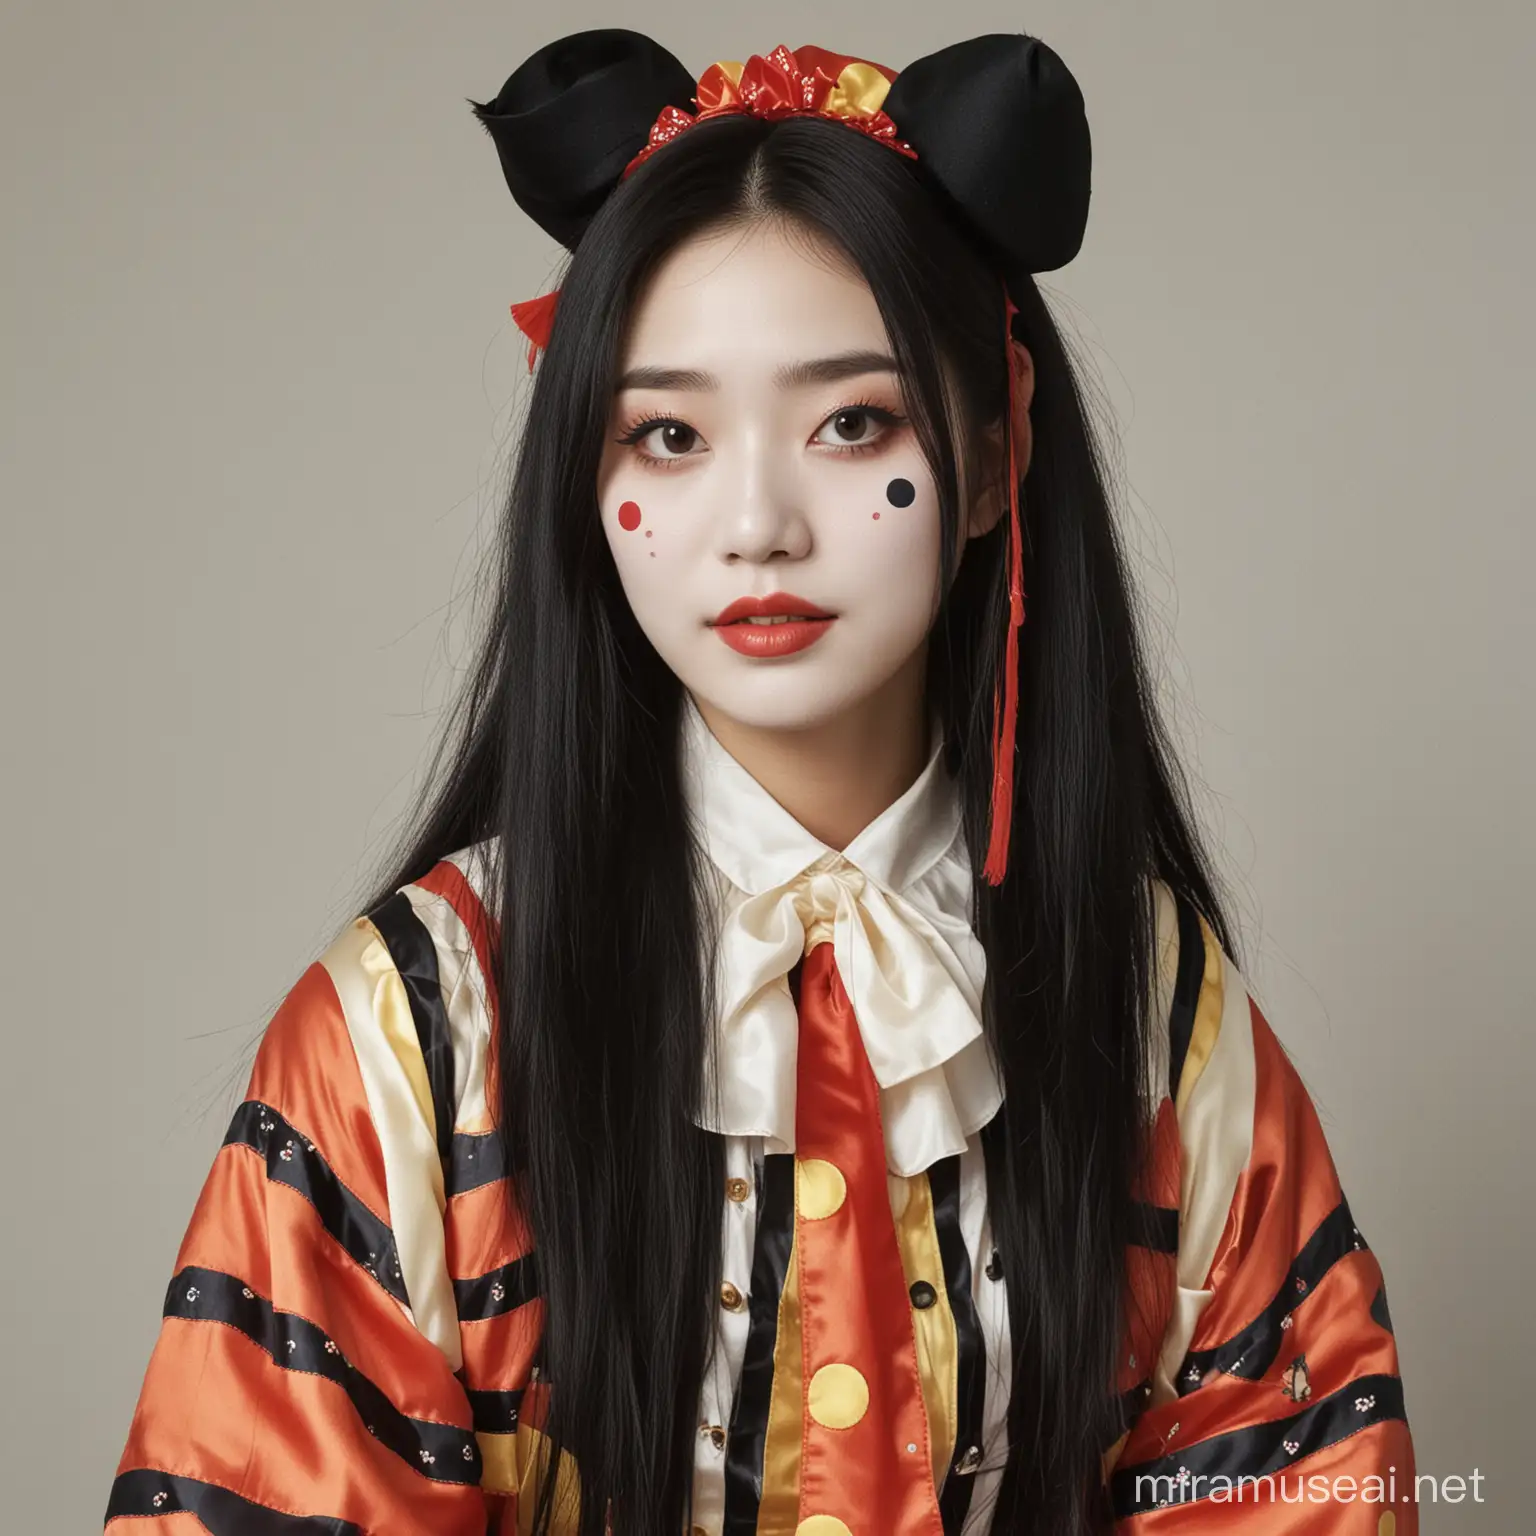 Young Korean Woman in Colorful Clown Costume with Long Black Hair